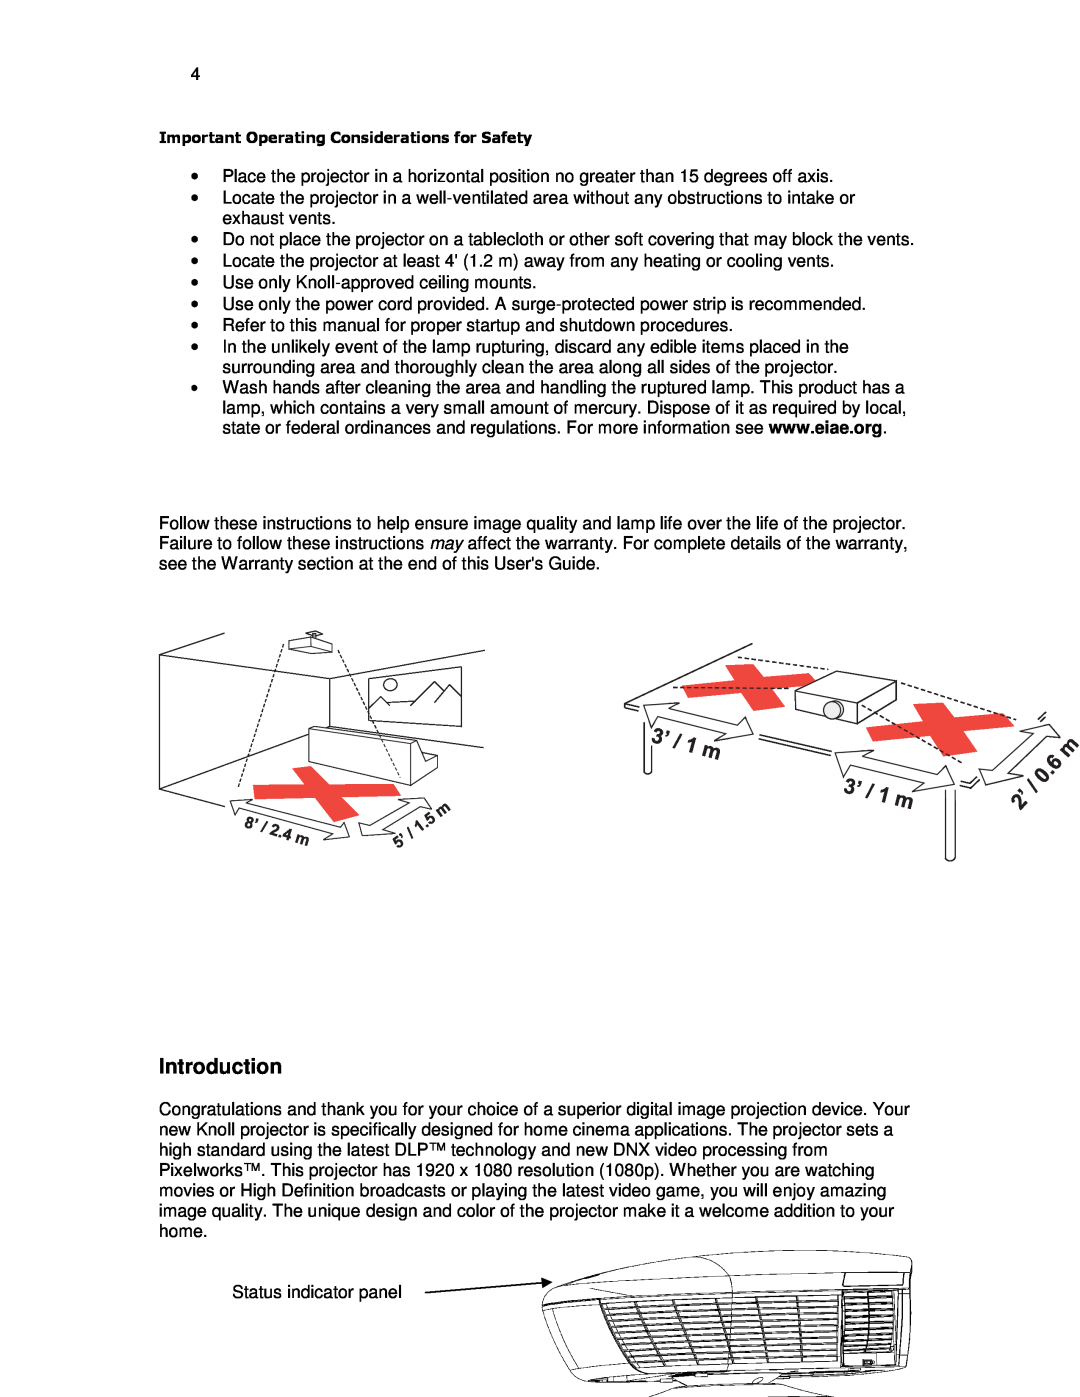 Knoll Systems HDP404 user manual Introduction 